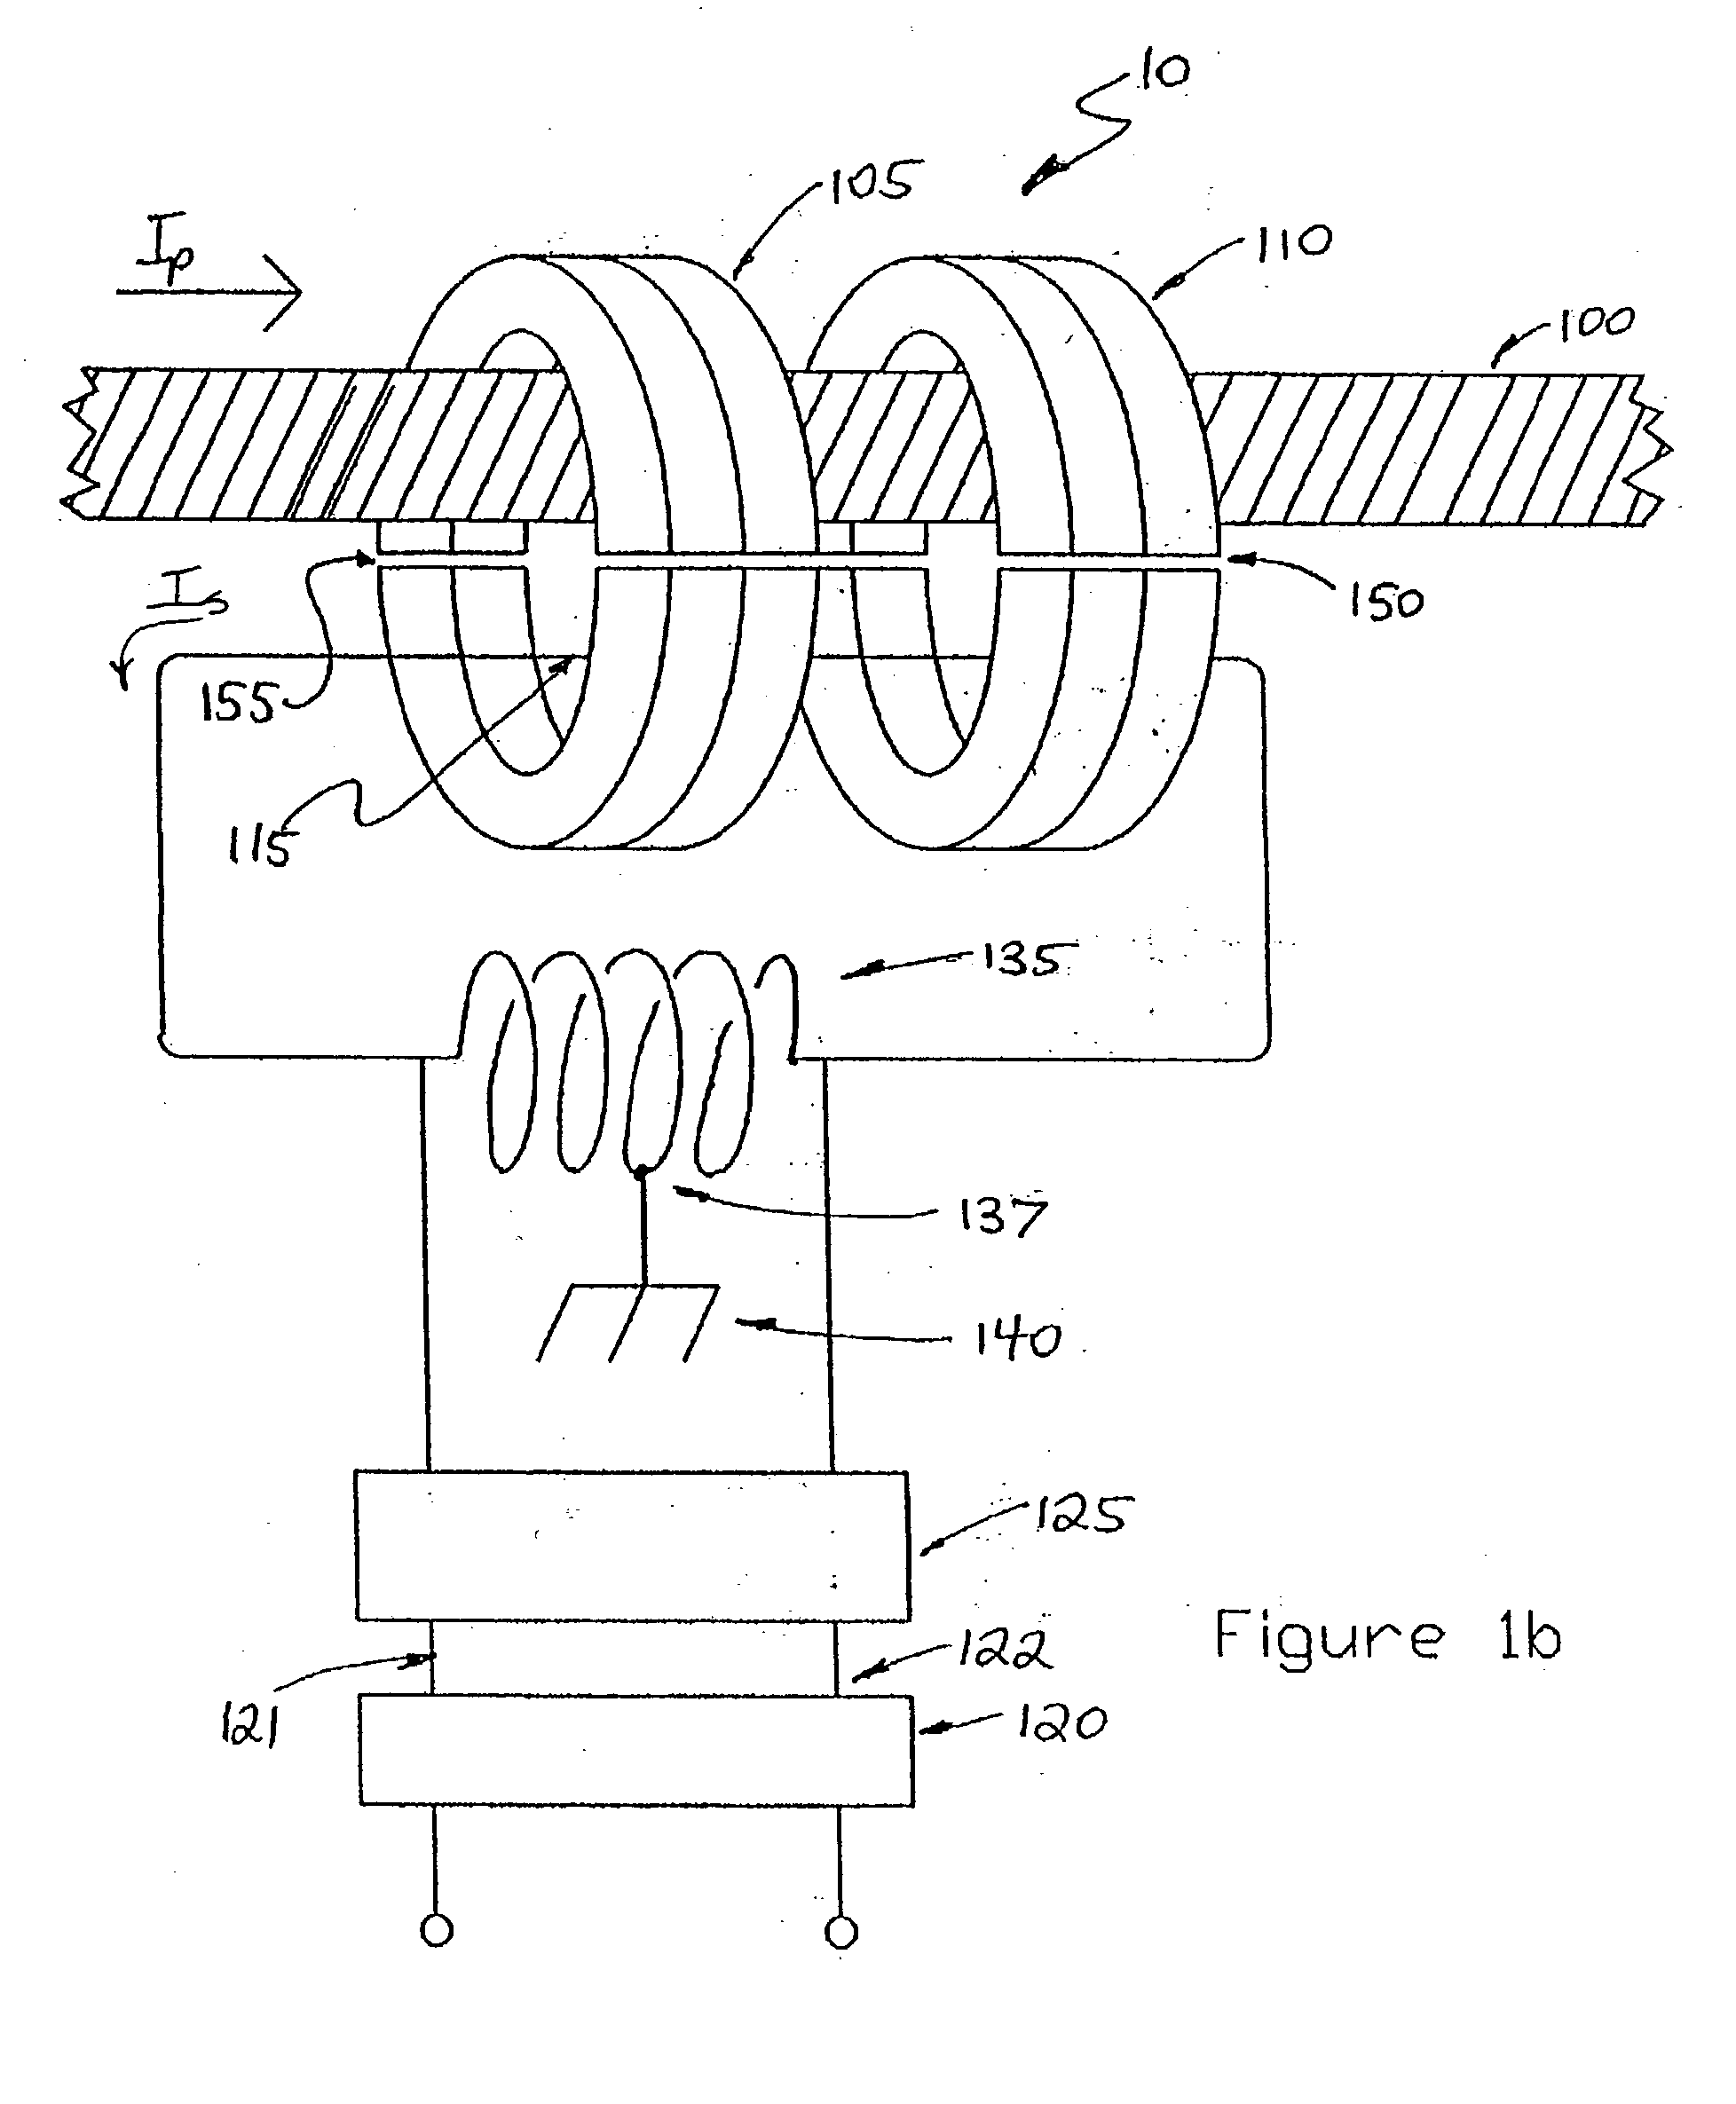 High current inductive coupler and current transformer for power lines